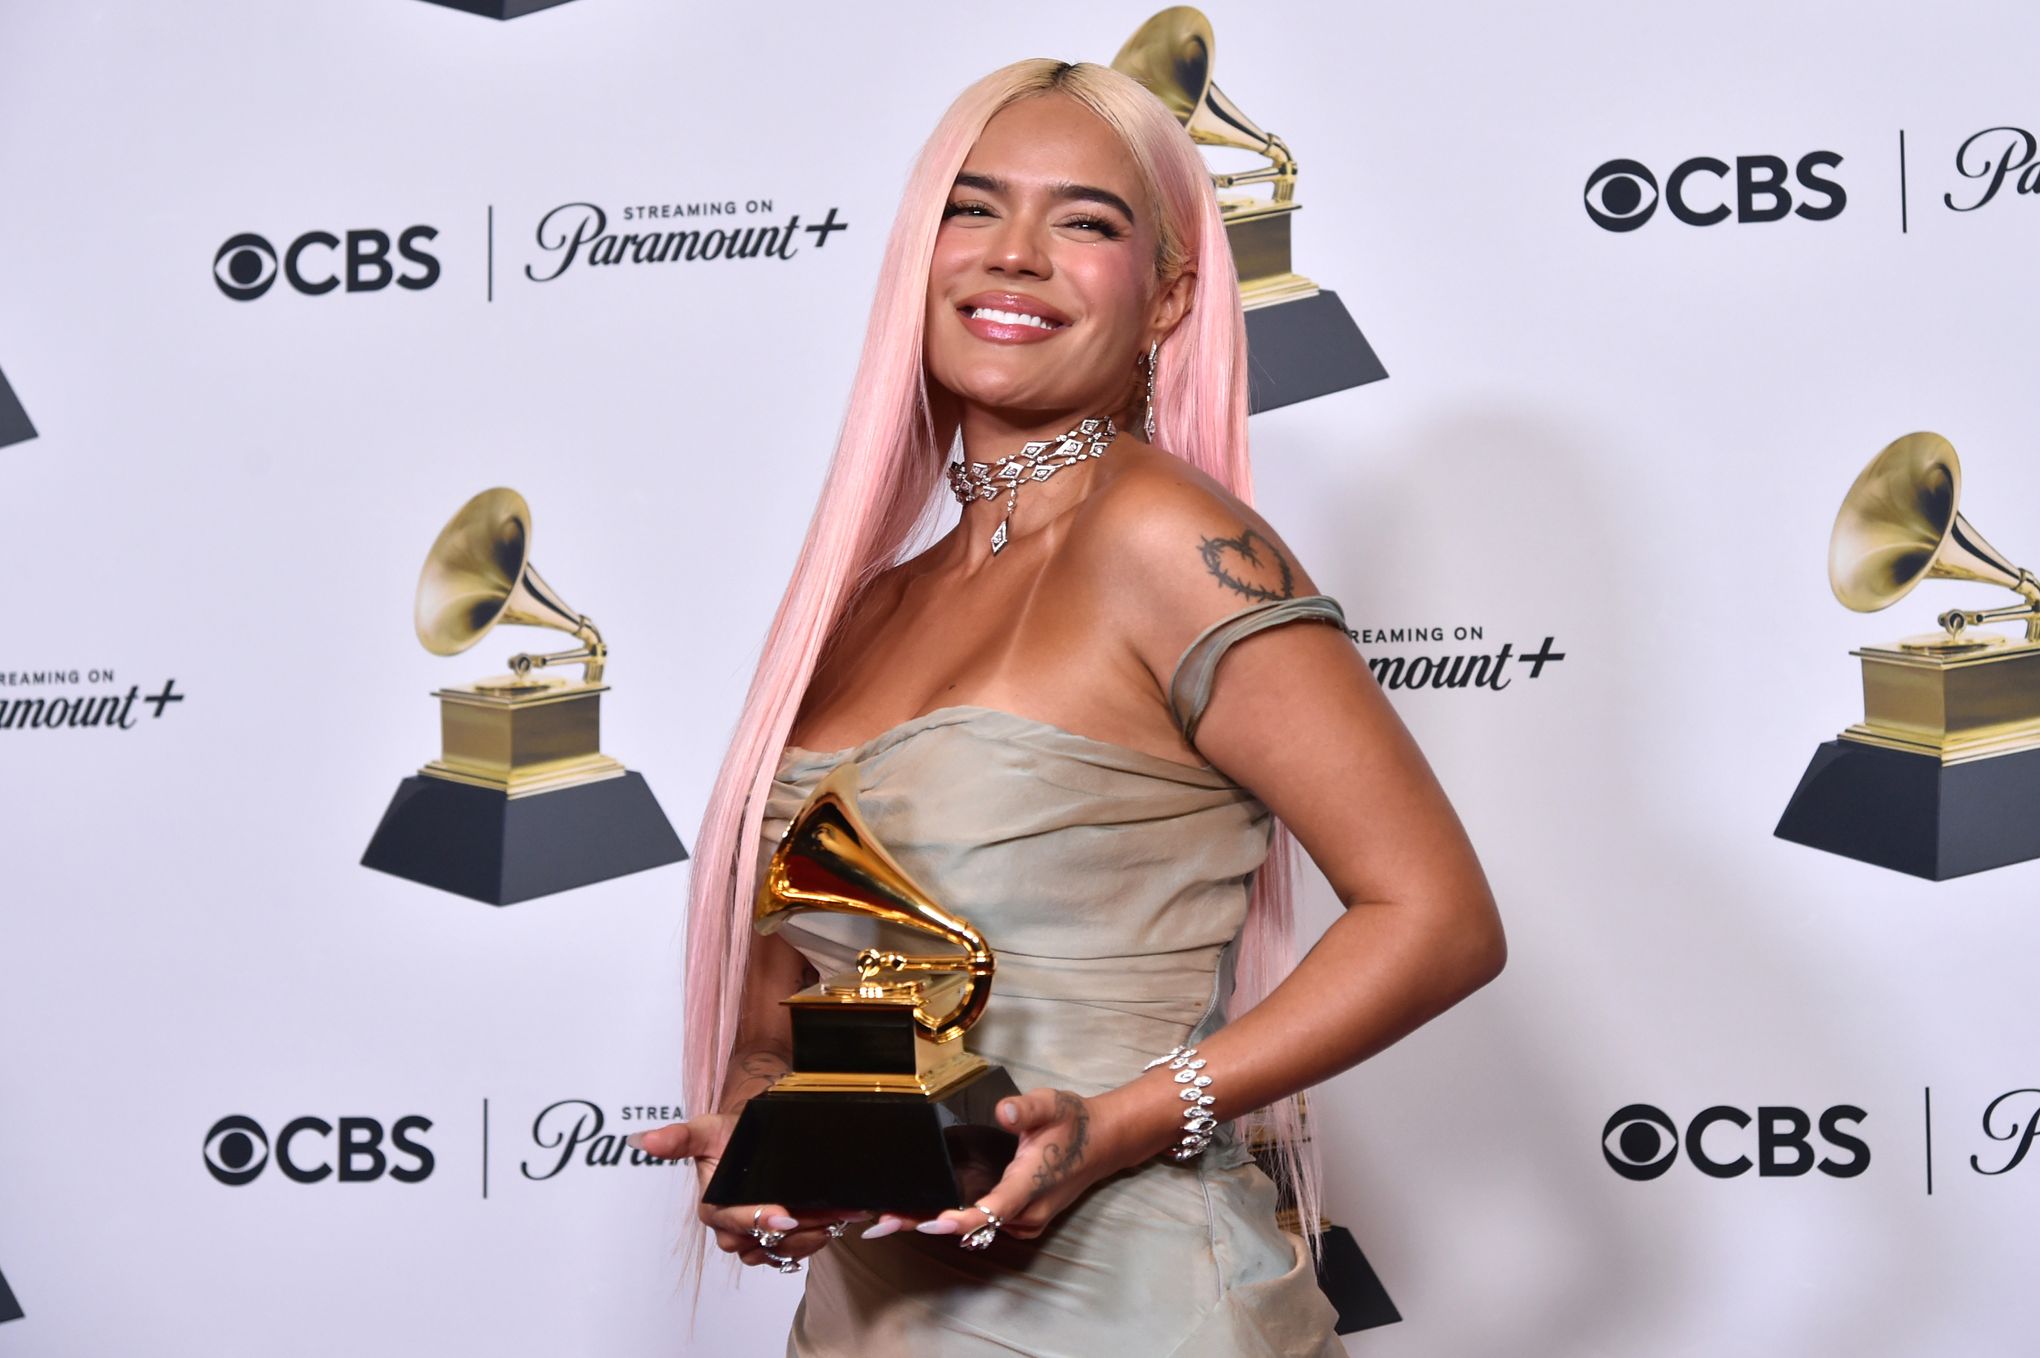 How Karol G Made History at her TODAY Show Concert